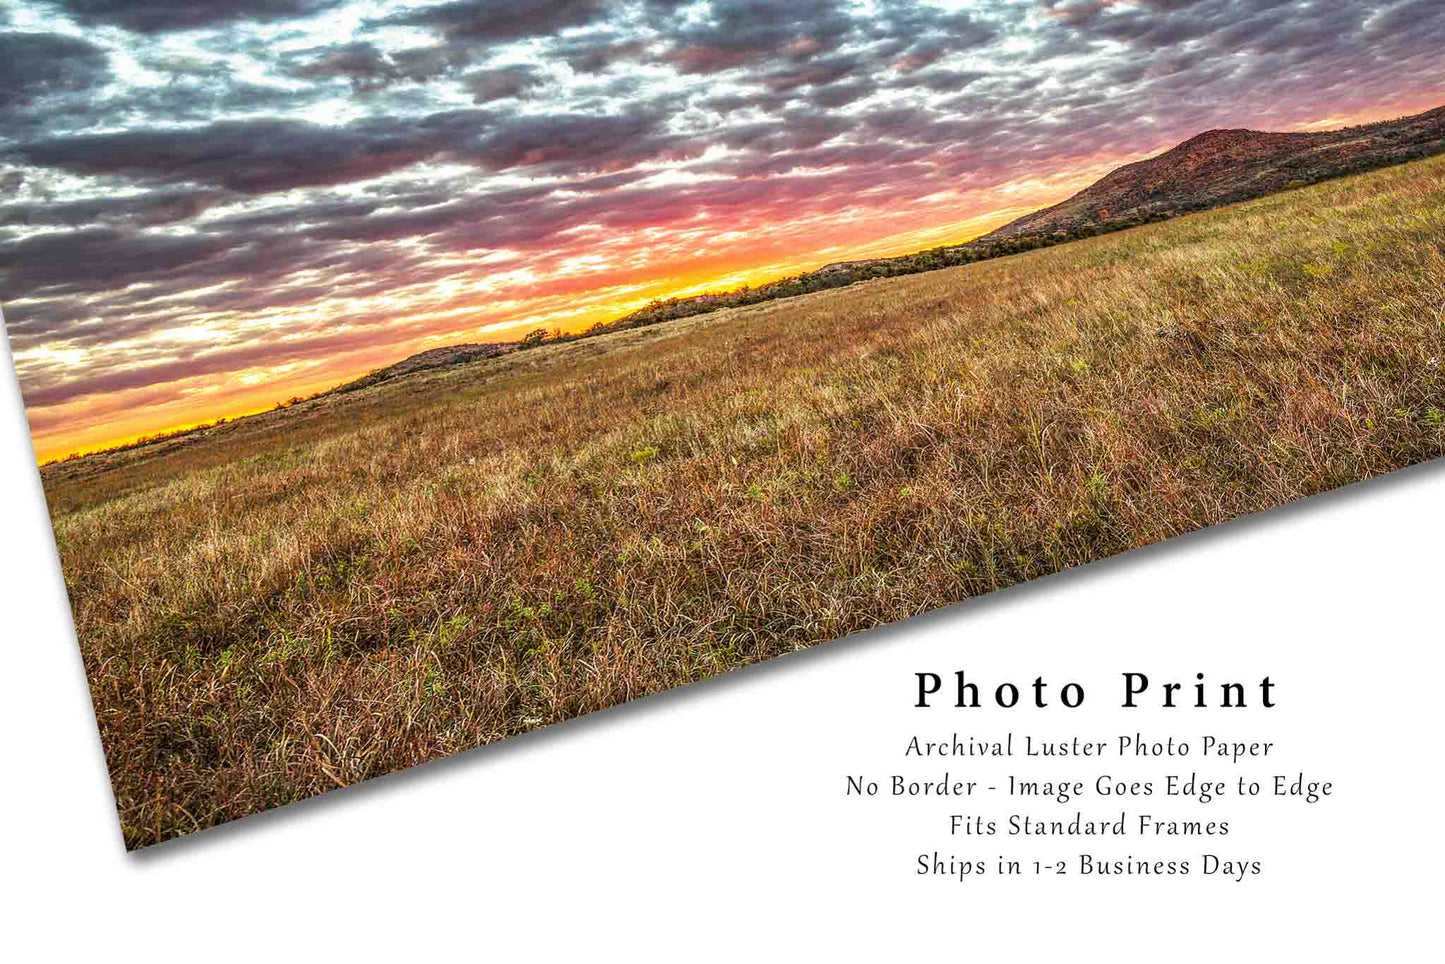 Landscape Photography Print - Wall Art Picture of Scenic Sunset Over Wichita Mountains near Lawton in Southwest Oklahoma Scenery Decor